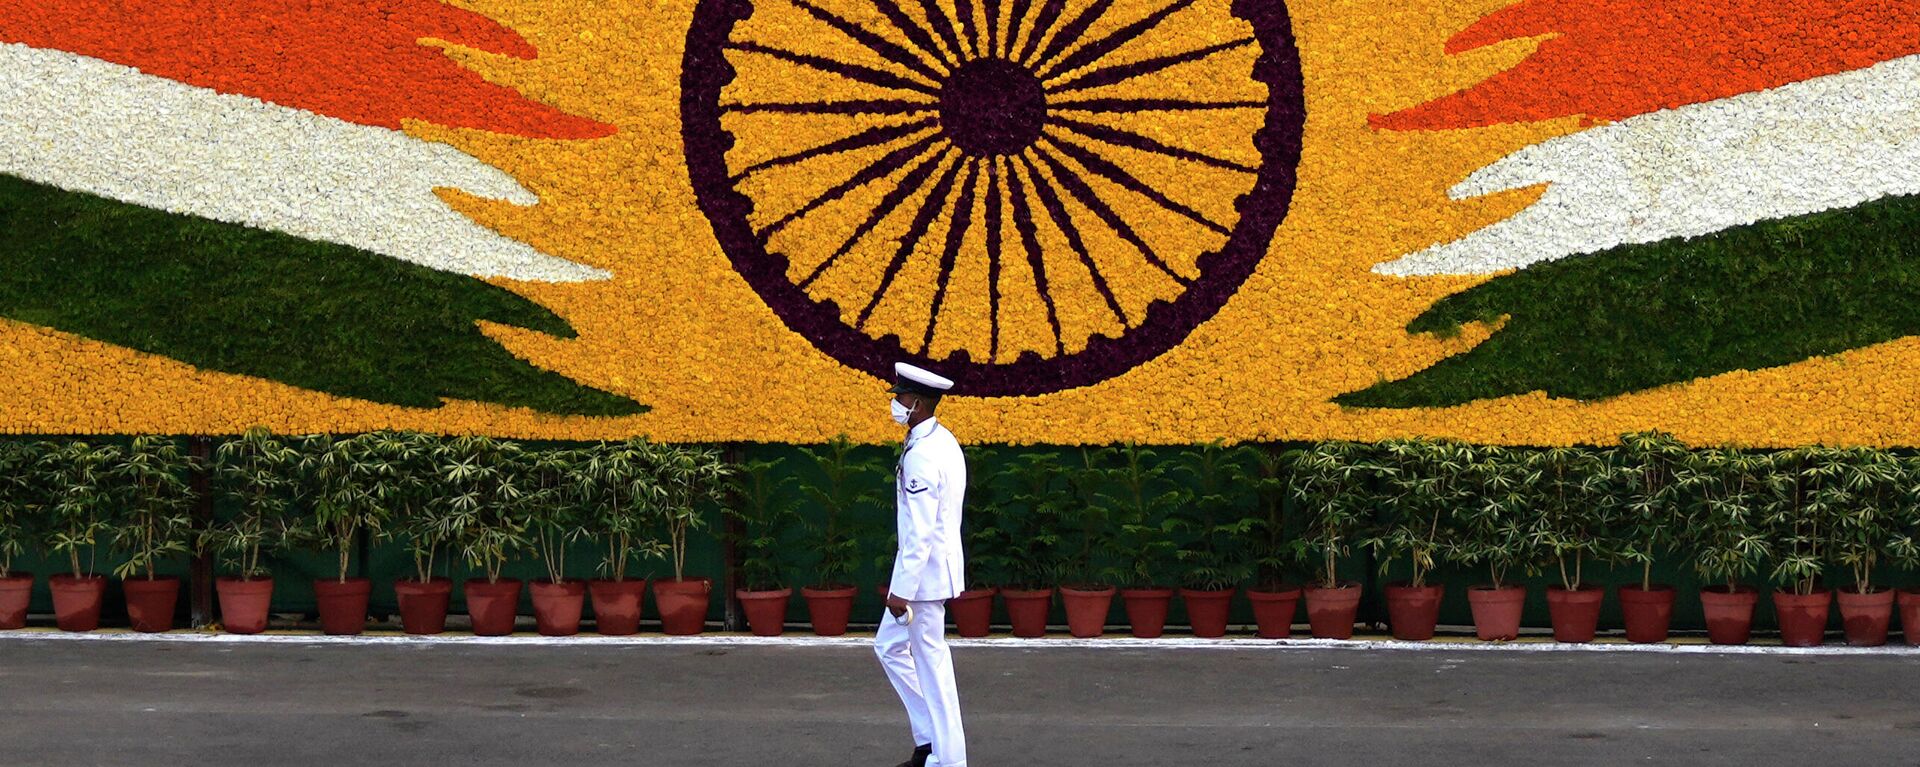 An Indian navy sailor walks past the national flag emblem during Independence Day celebrations at the historic 17th century Red Fort in New Delhi, India, Sunday, Aug. 15, 2021 - Sputnik International, 1920, 22.09.2022